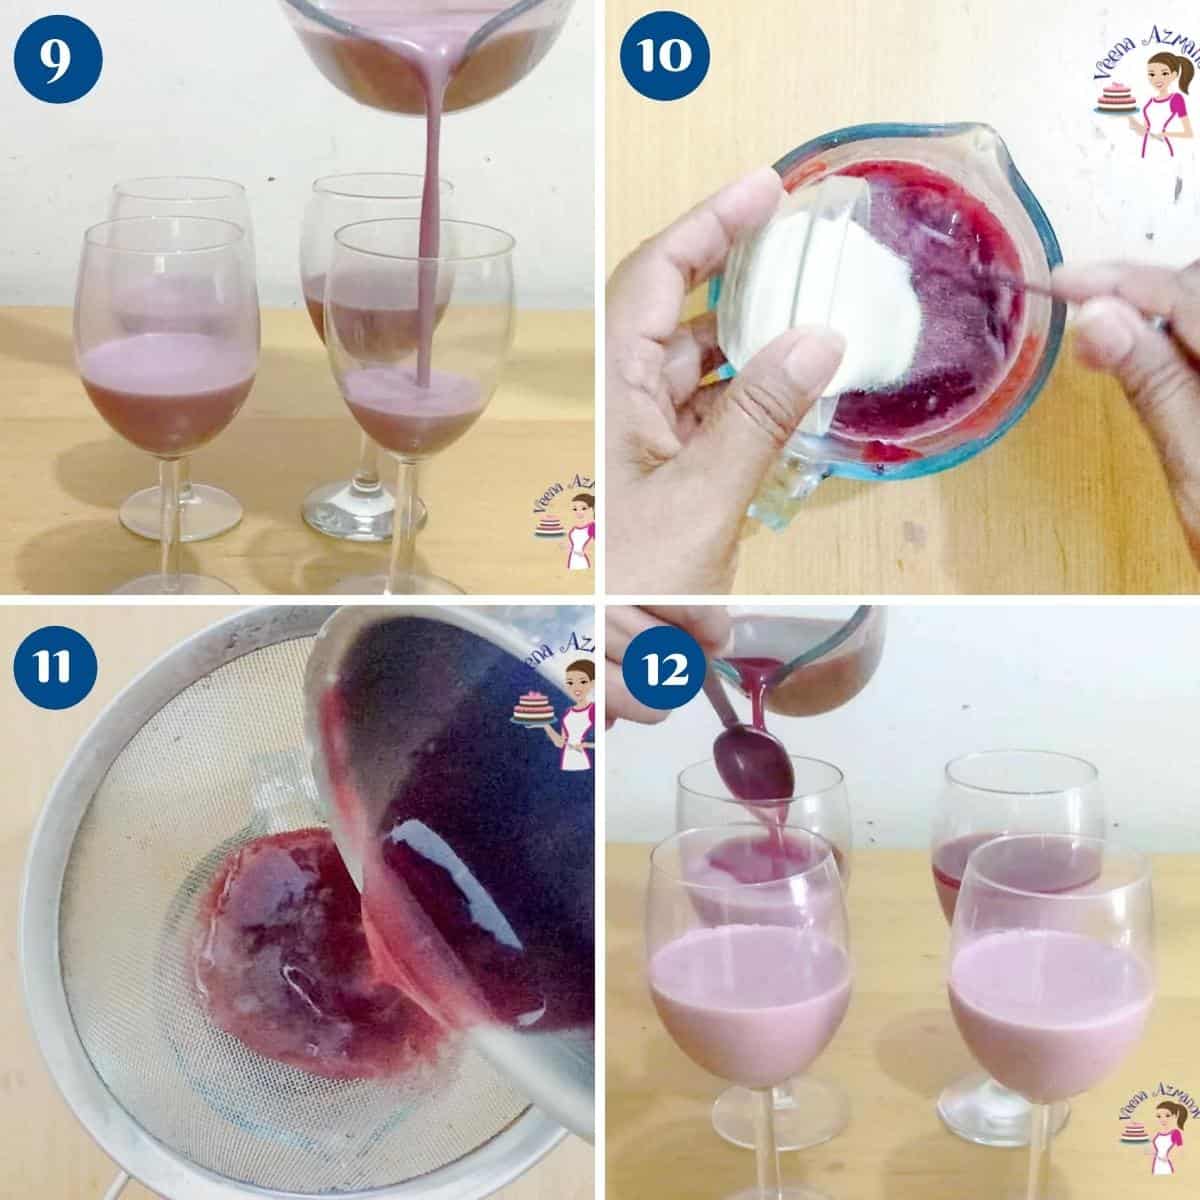 Progress pictures pouring panna cotta in wine glasses.